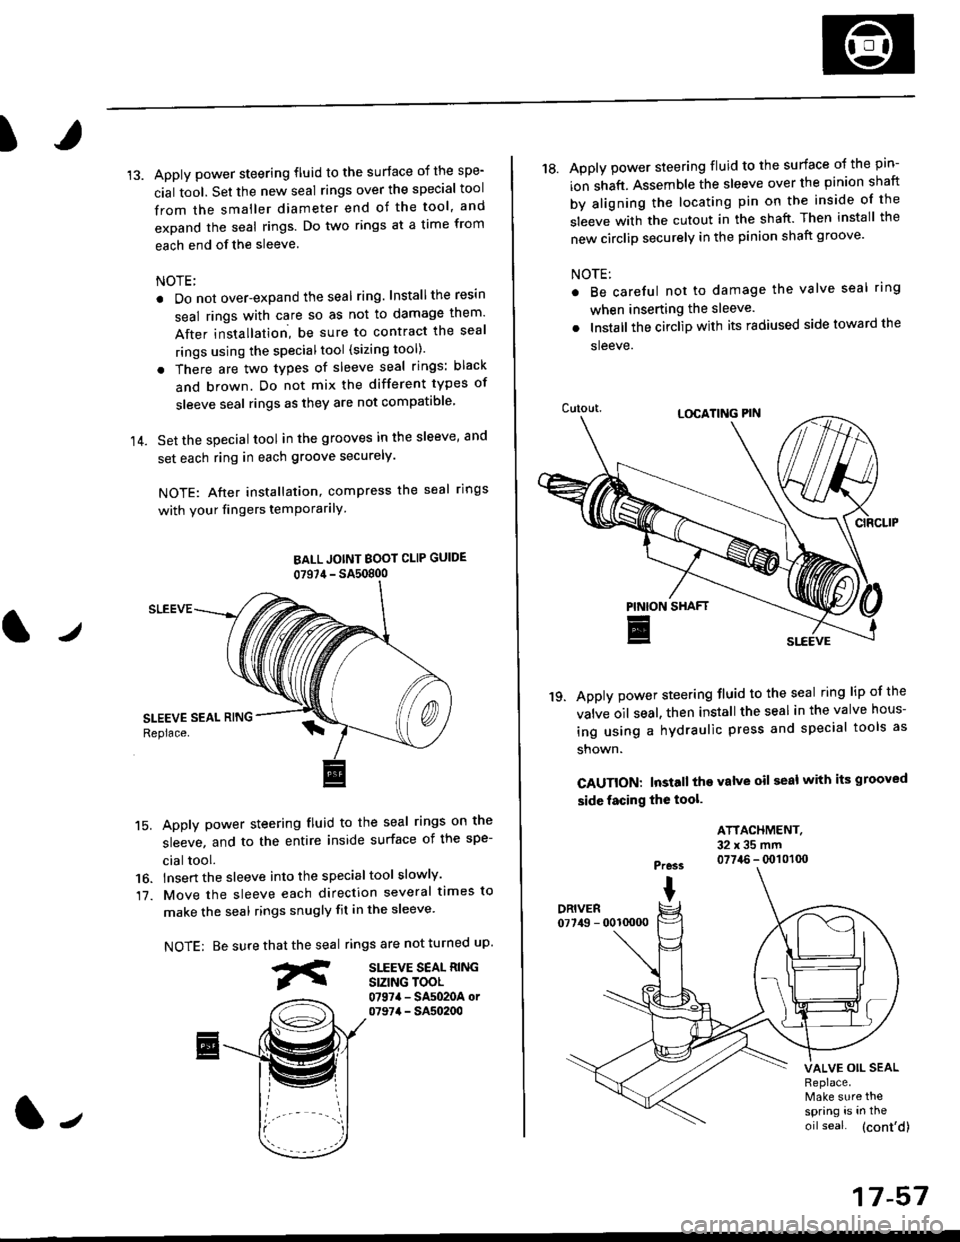 HONDA CIVIC 1997 6.G Workshop Manual I
14.
Apply power steering fluid to the surface of the spe-
cial tool. Set the new seal rings over the special tool
from the smaller diameter end of the tool, and
expand the seal rings. Do two rings a